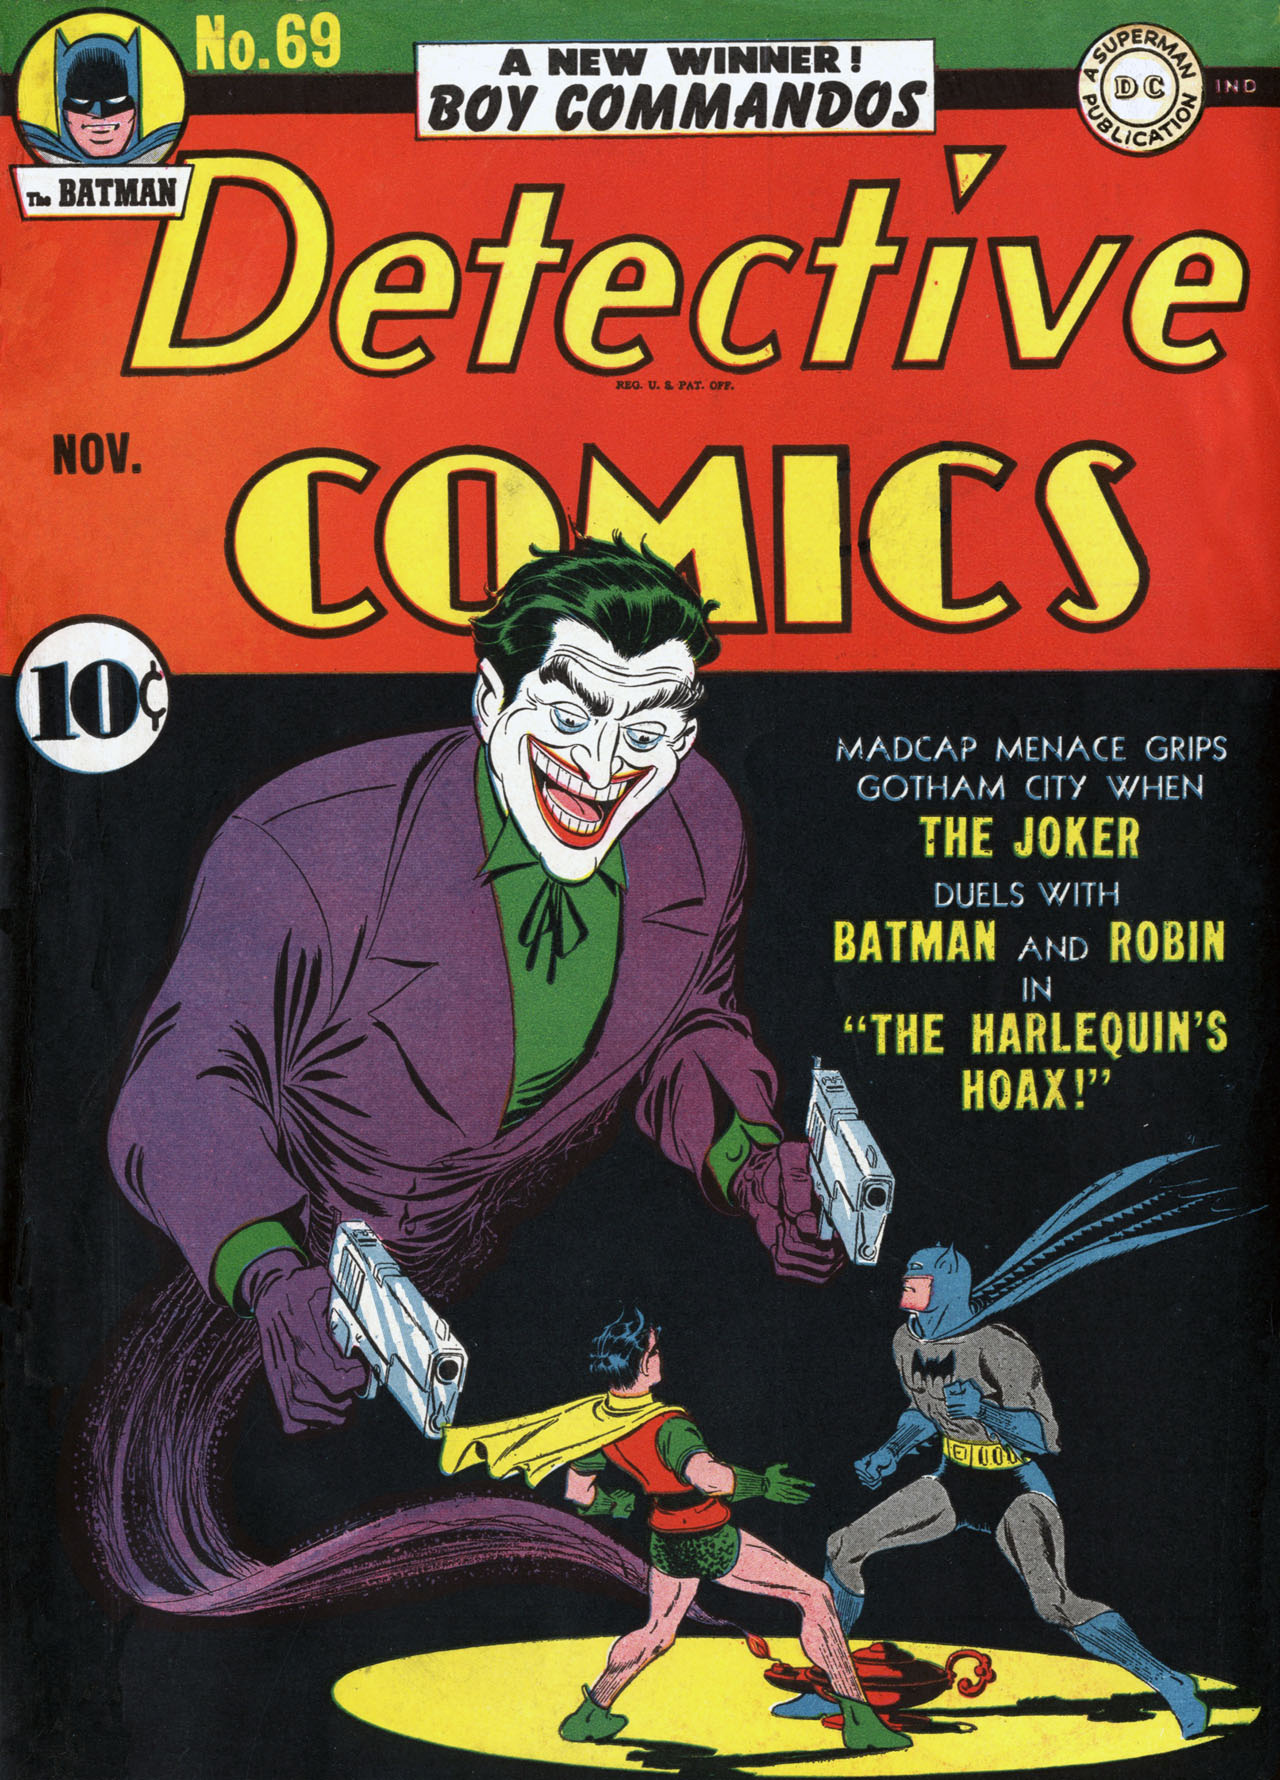 Xxx Bf 15ages Girls - Detective Comics 1937 Issue 69 | Read Detective Comics 1937 Issue 69 comic  online in high quality. Read Full Comic online for free - Read comics  online in high quality .|viewcomiconline.com